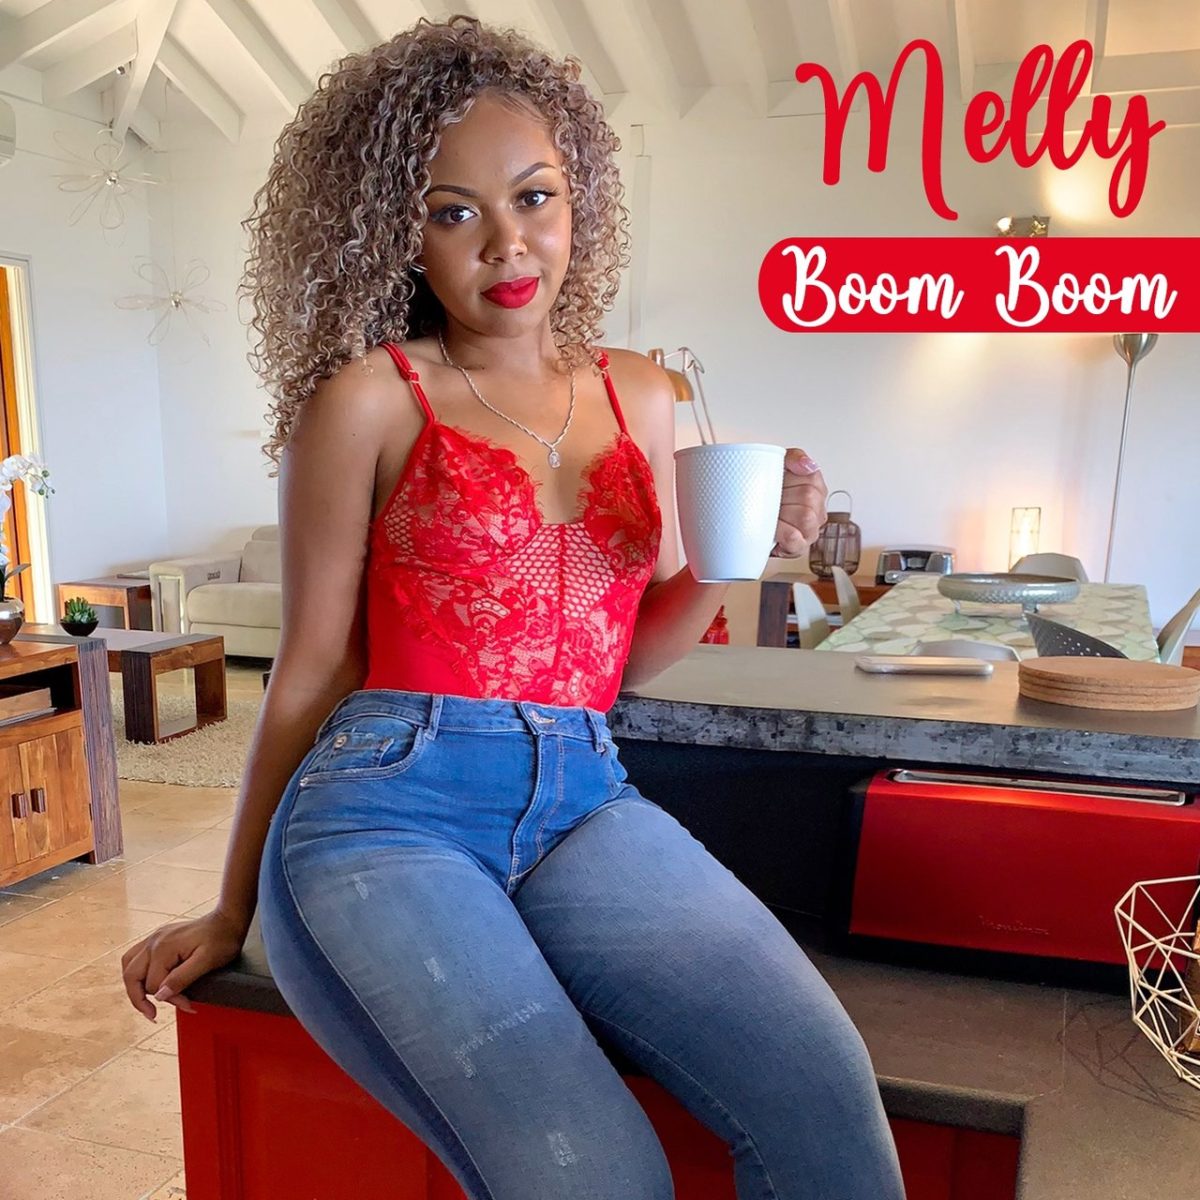 Melly - Boom Boom (Cover)